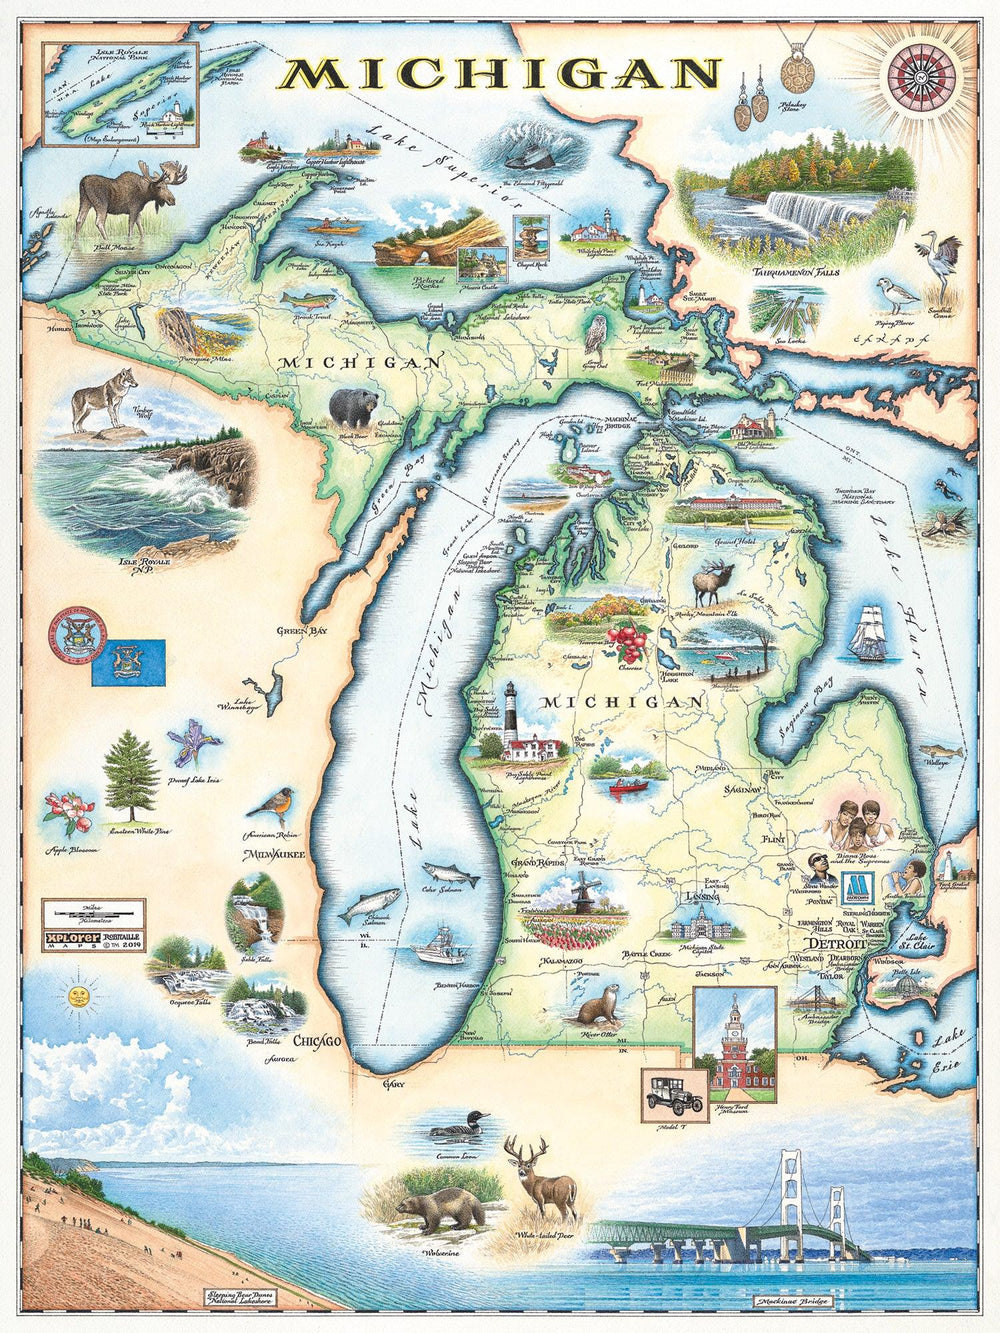 Xplorer Maps Releases Hand Drawn Michigan State Map Featuring Lakes L 5315